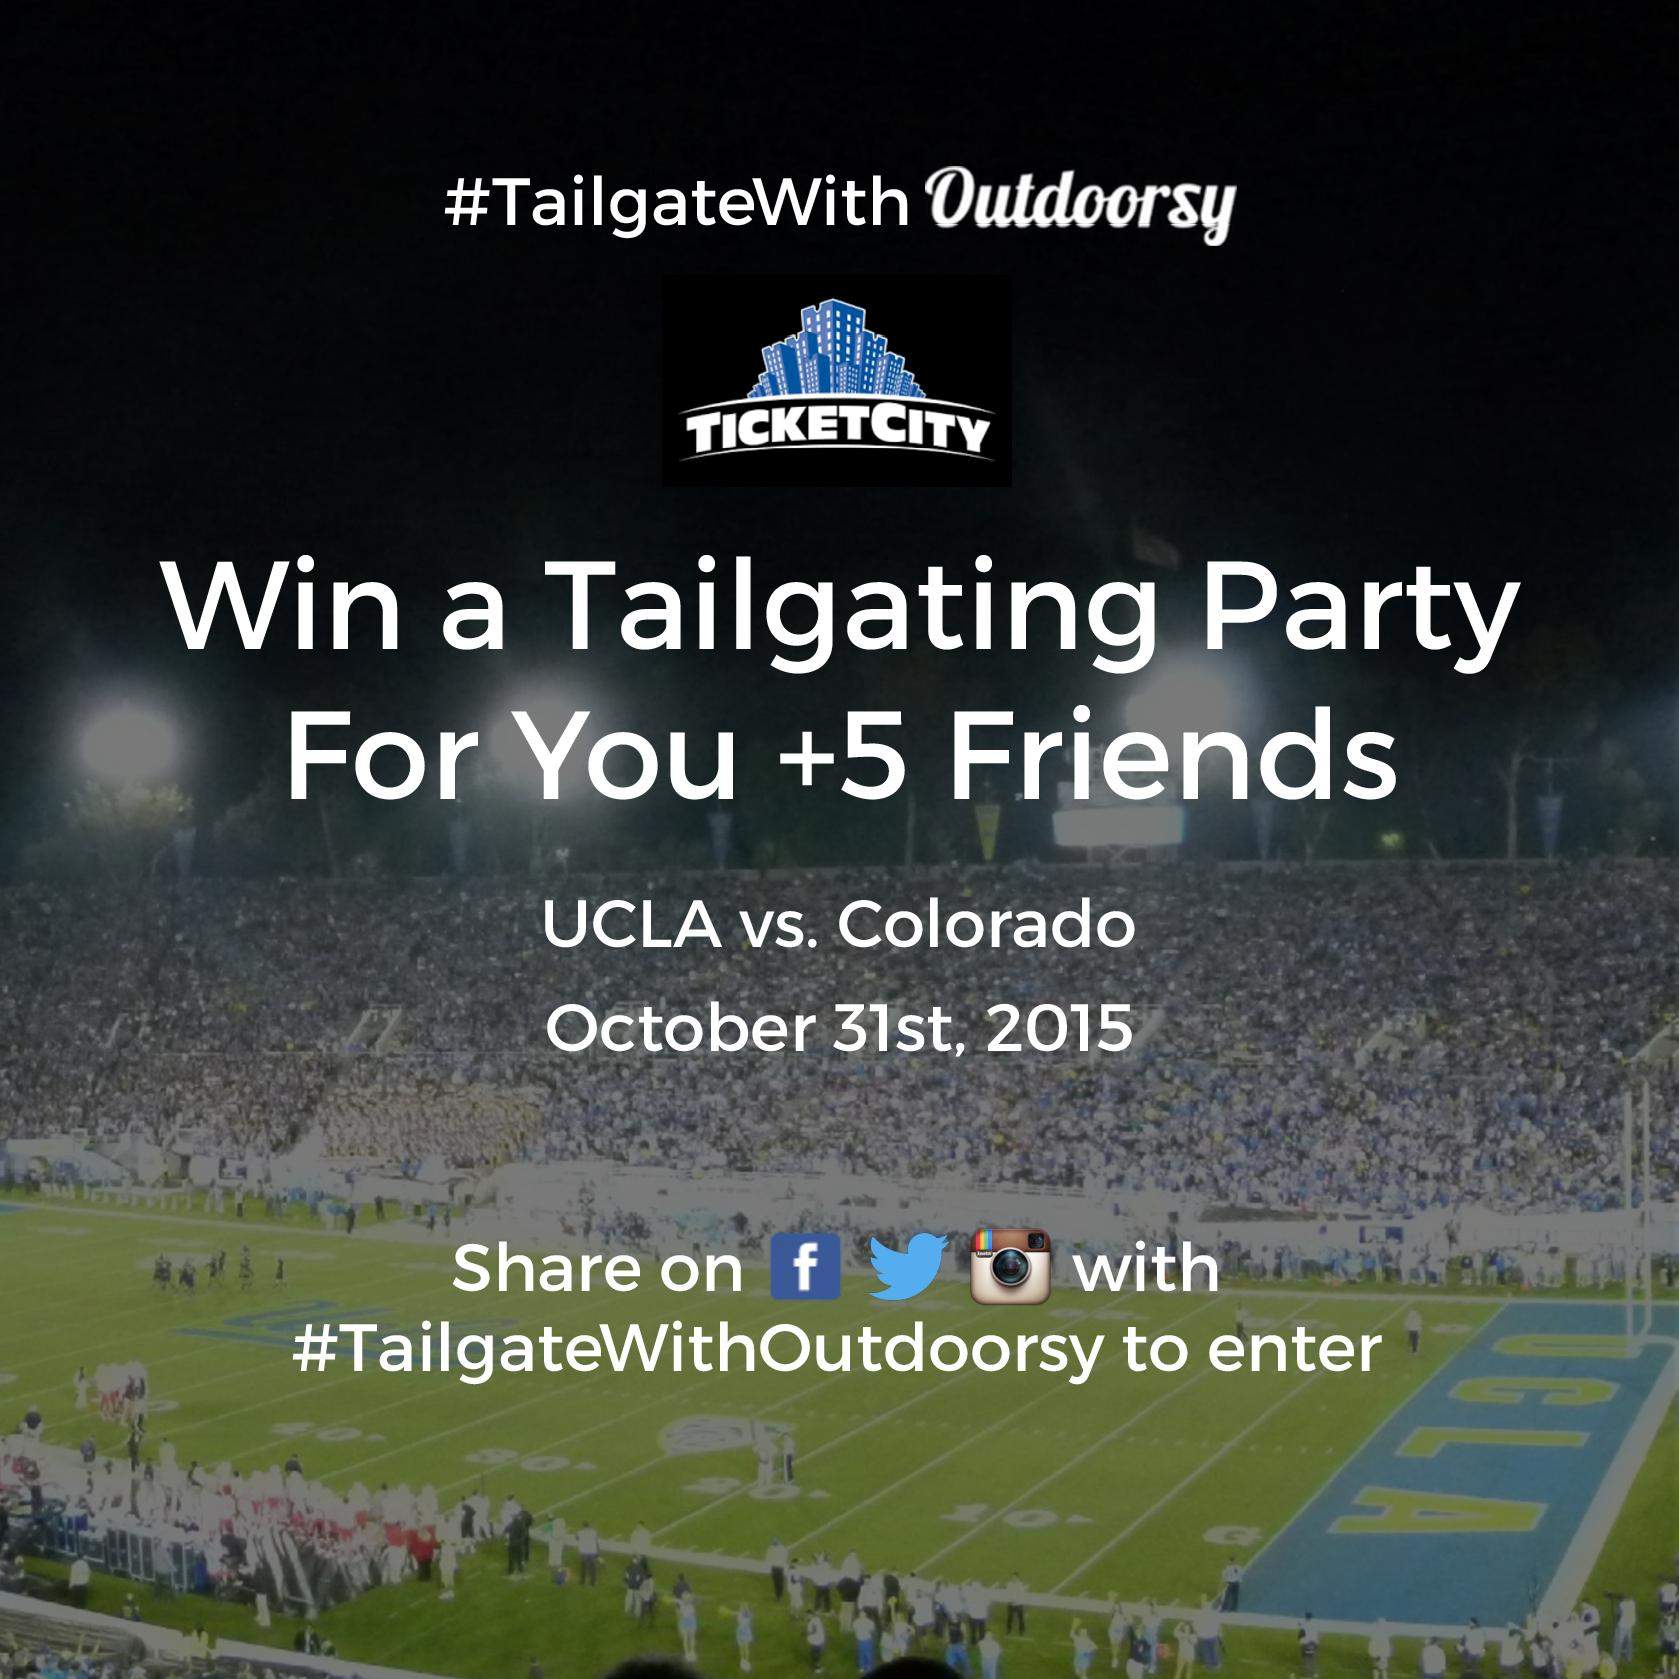 Enter Outdoorsy’s ultimate tailgating giveaway